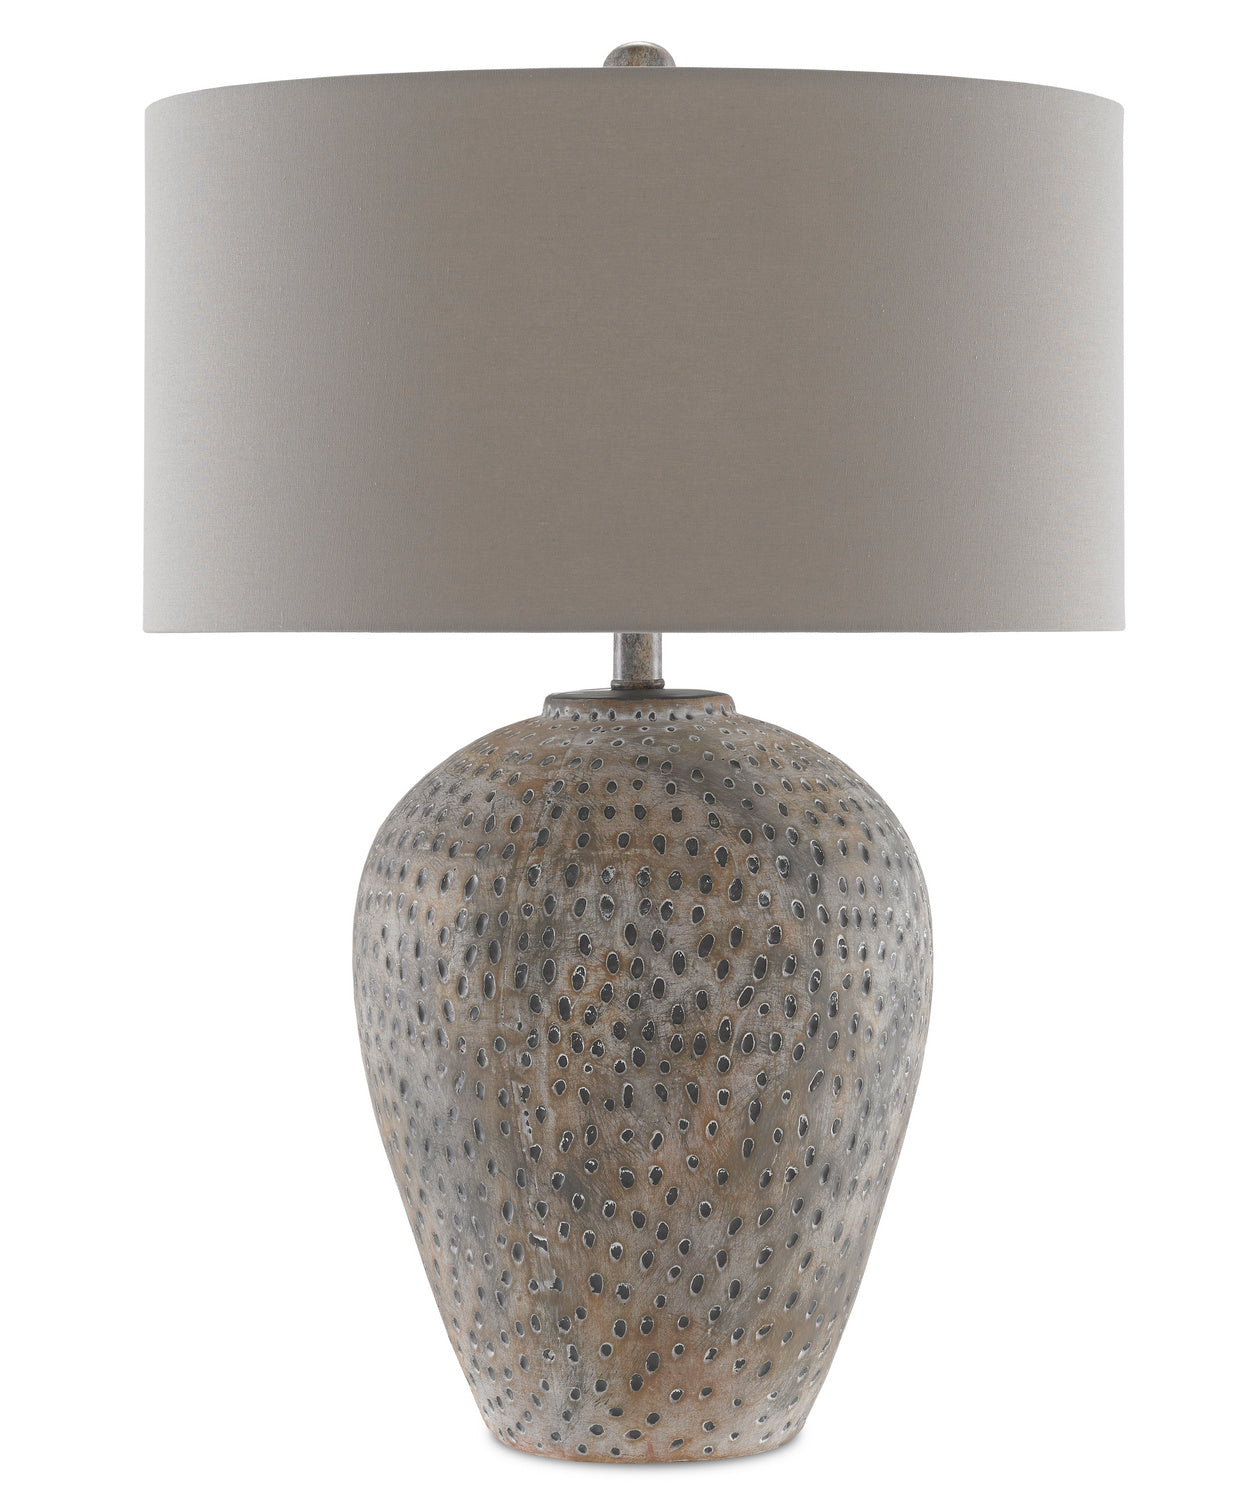 One Light Table Lamp from the Junius collection in Earth Gray finish